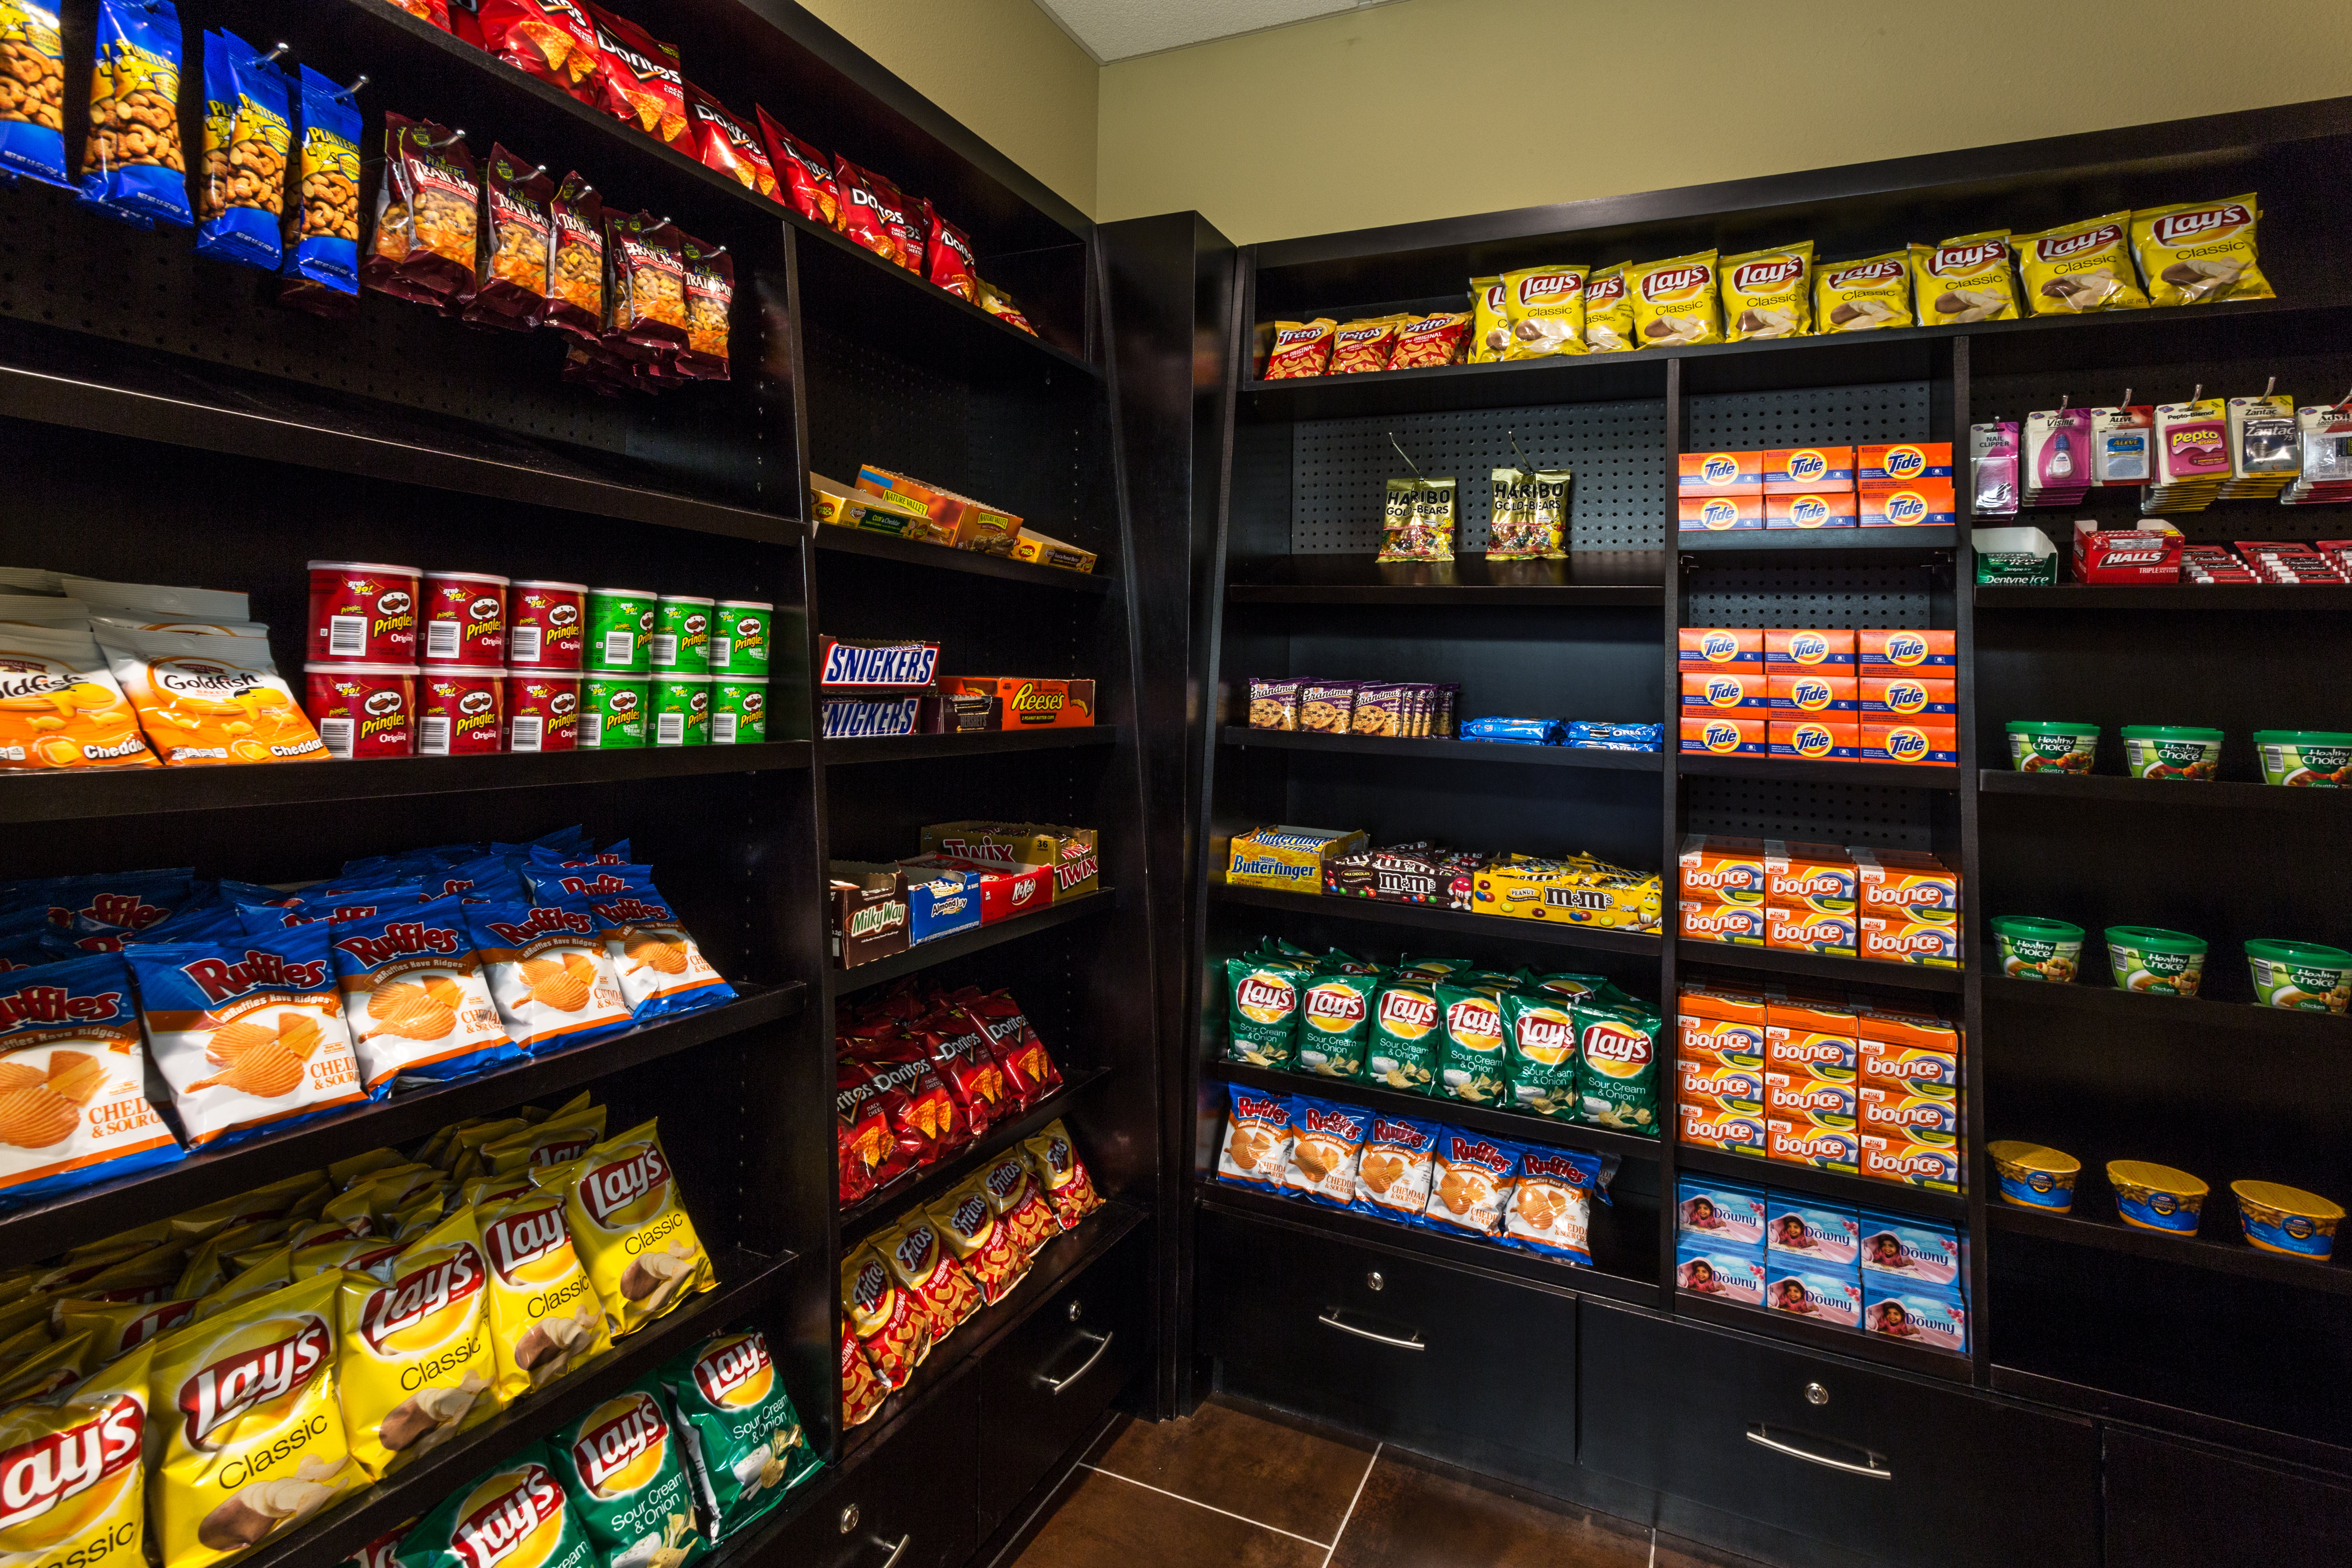 Snacks & beverages available for purchase 24/7 at the Pantry